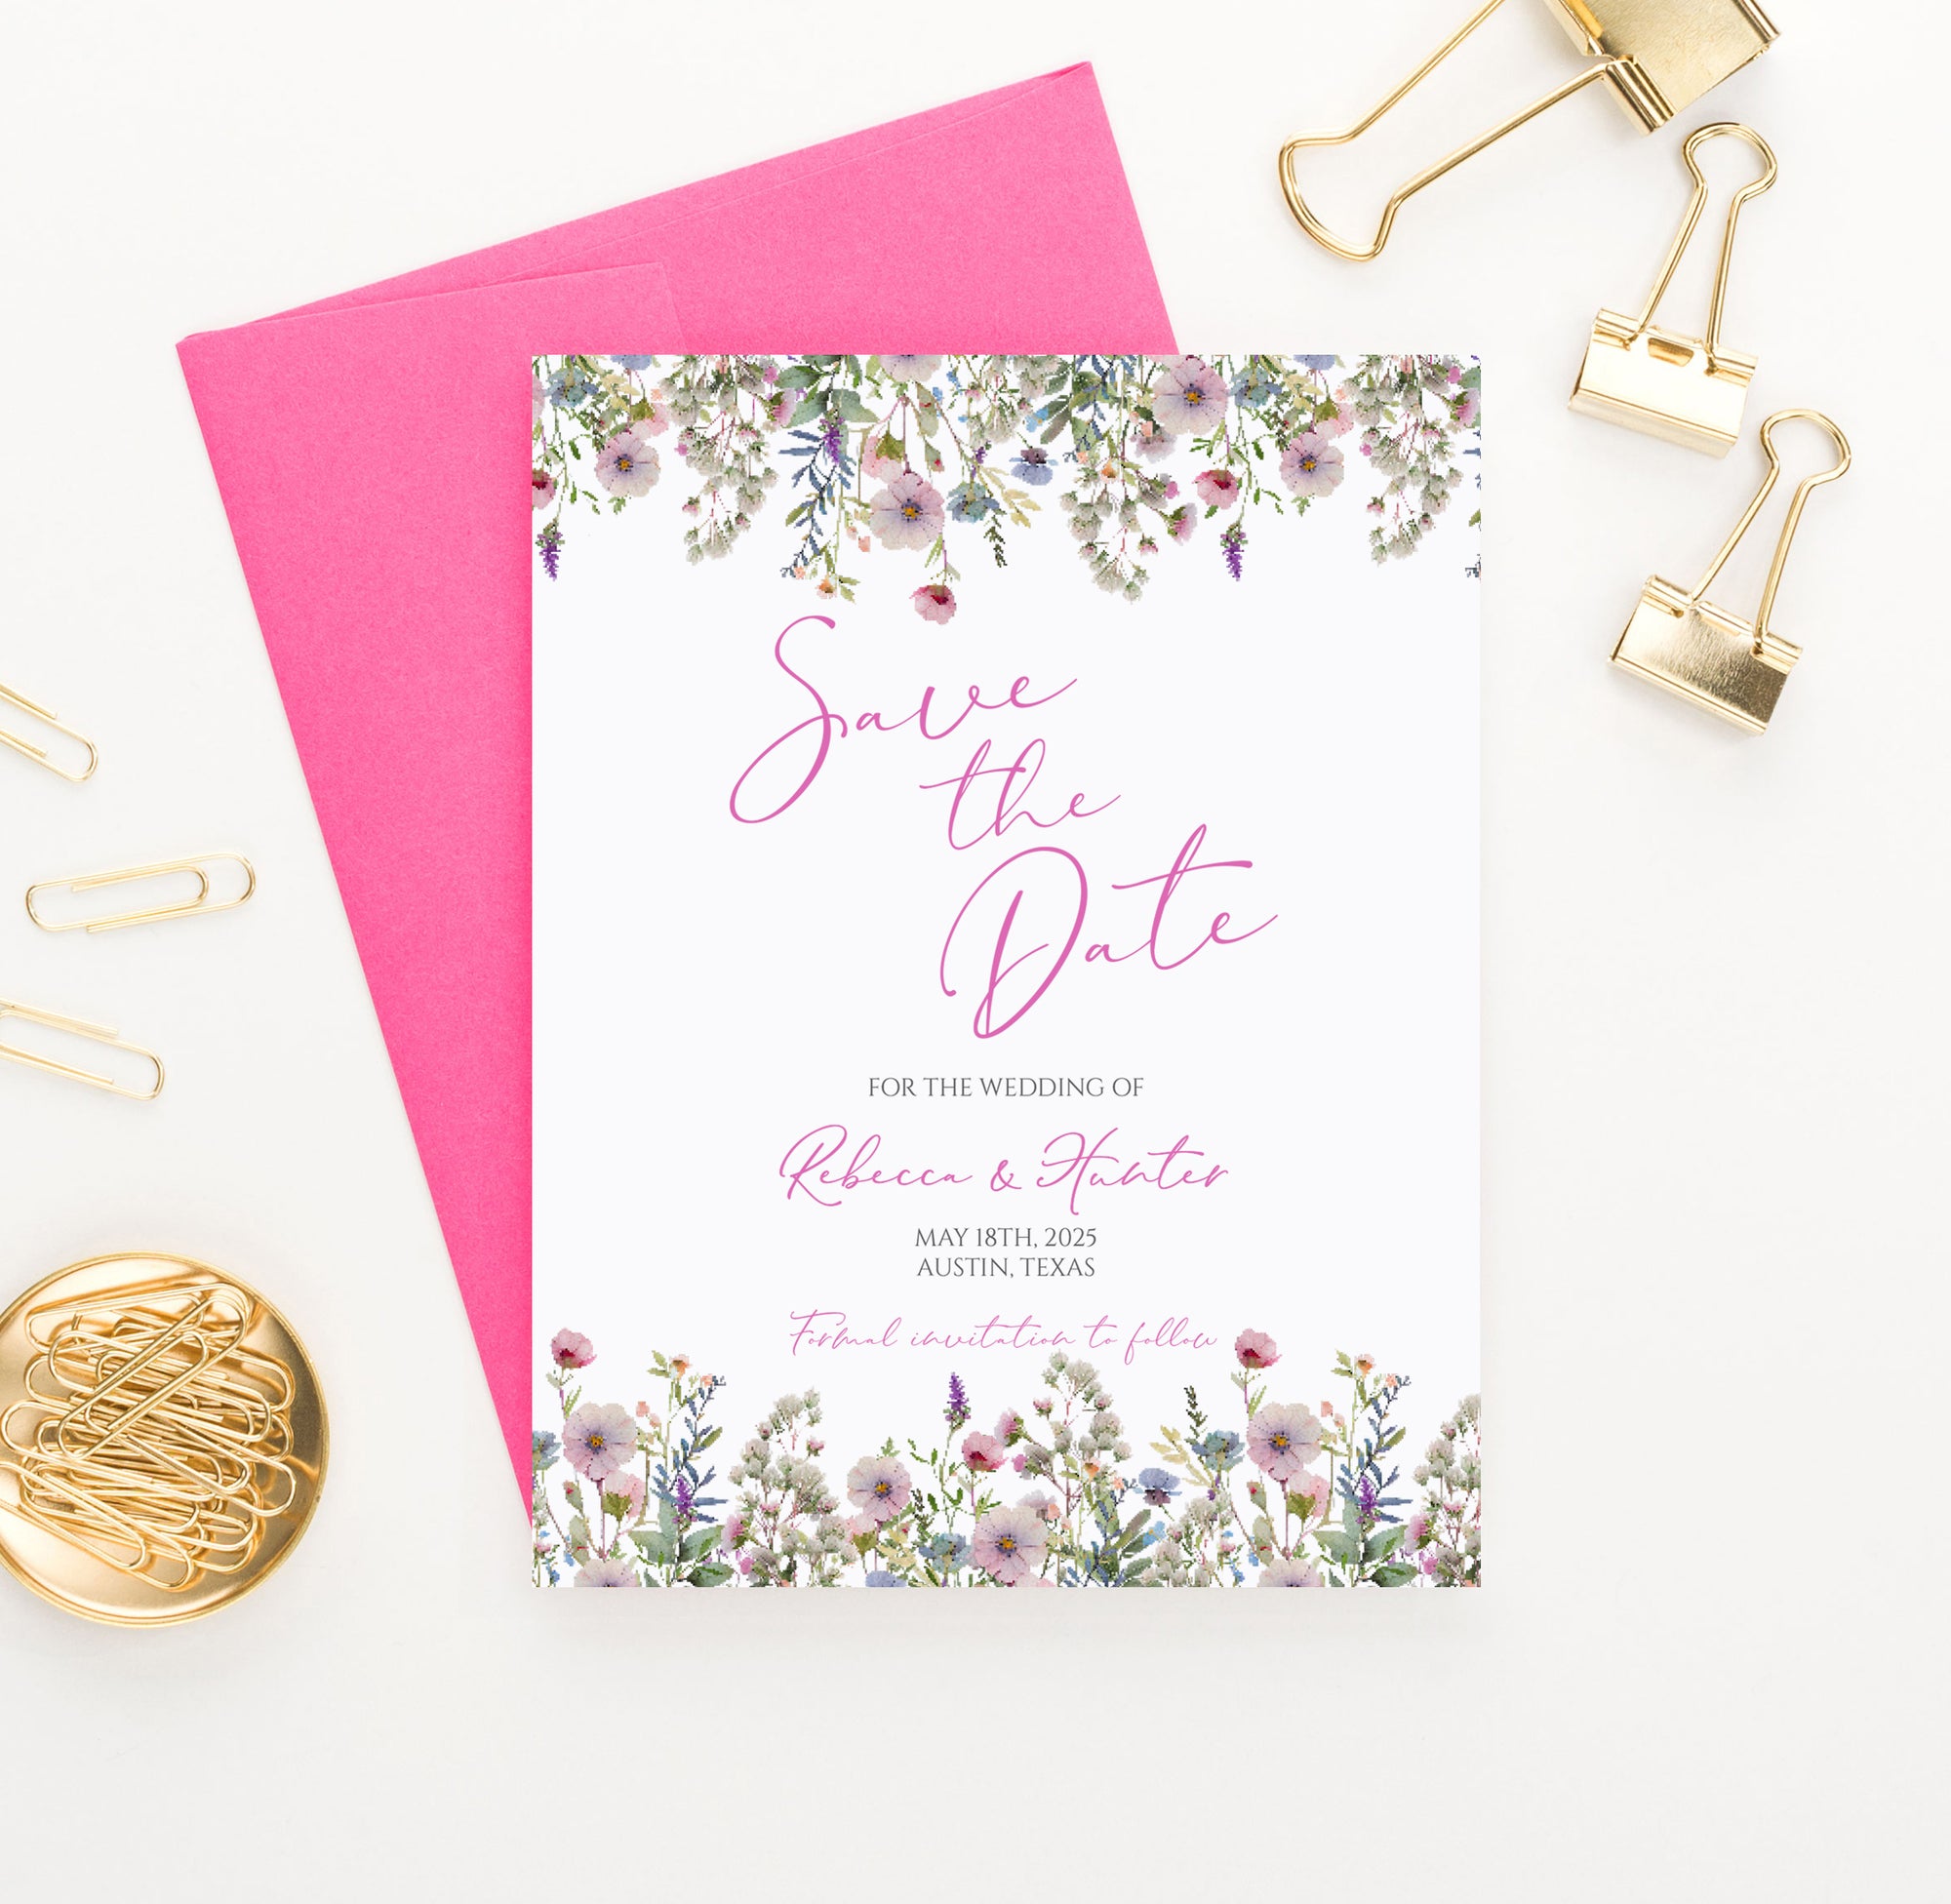 Classic Save The Dates With Elegant Florals